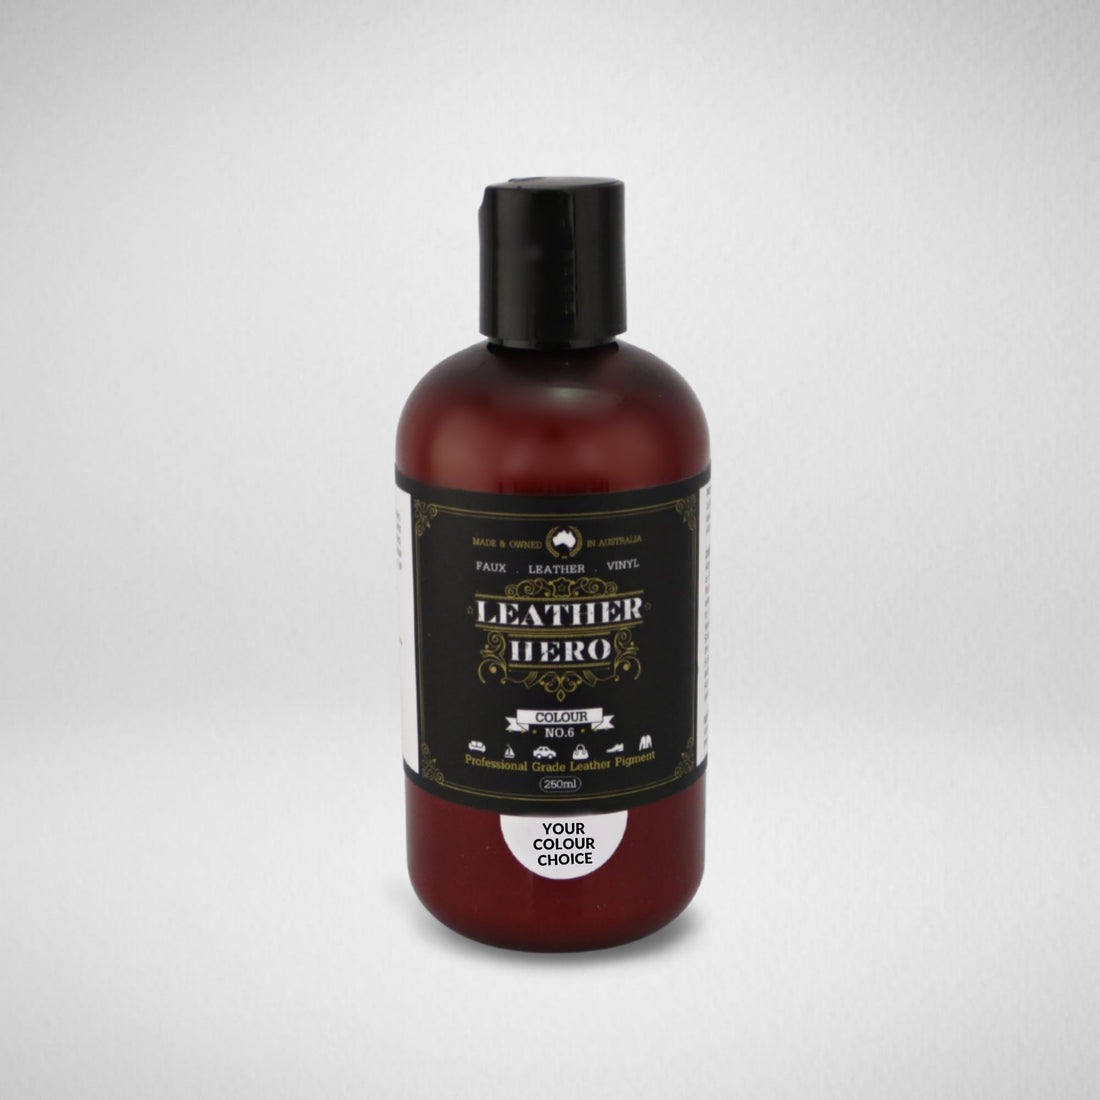 Leather Paint - Cherry Leather Repair & Recolouring Leather Hero Australia